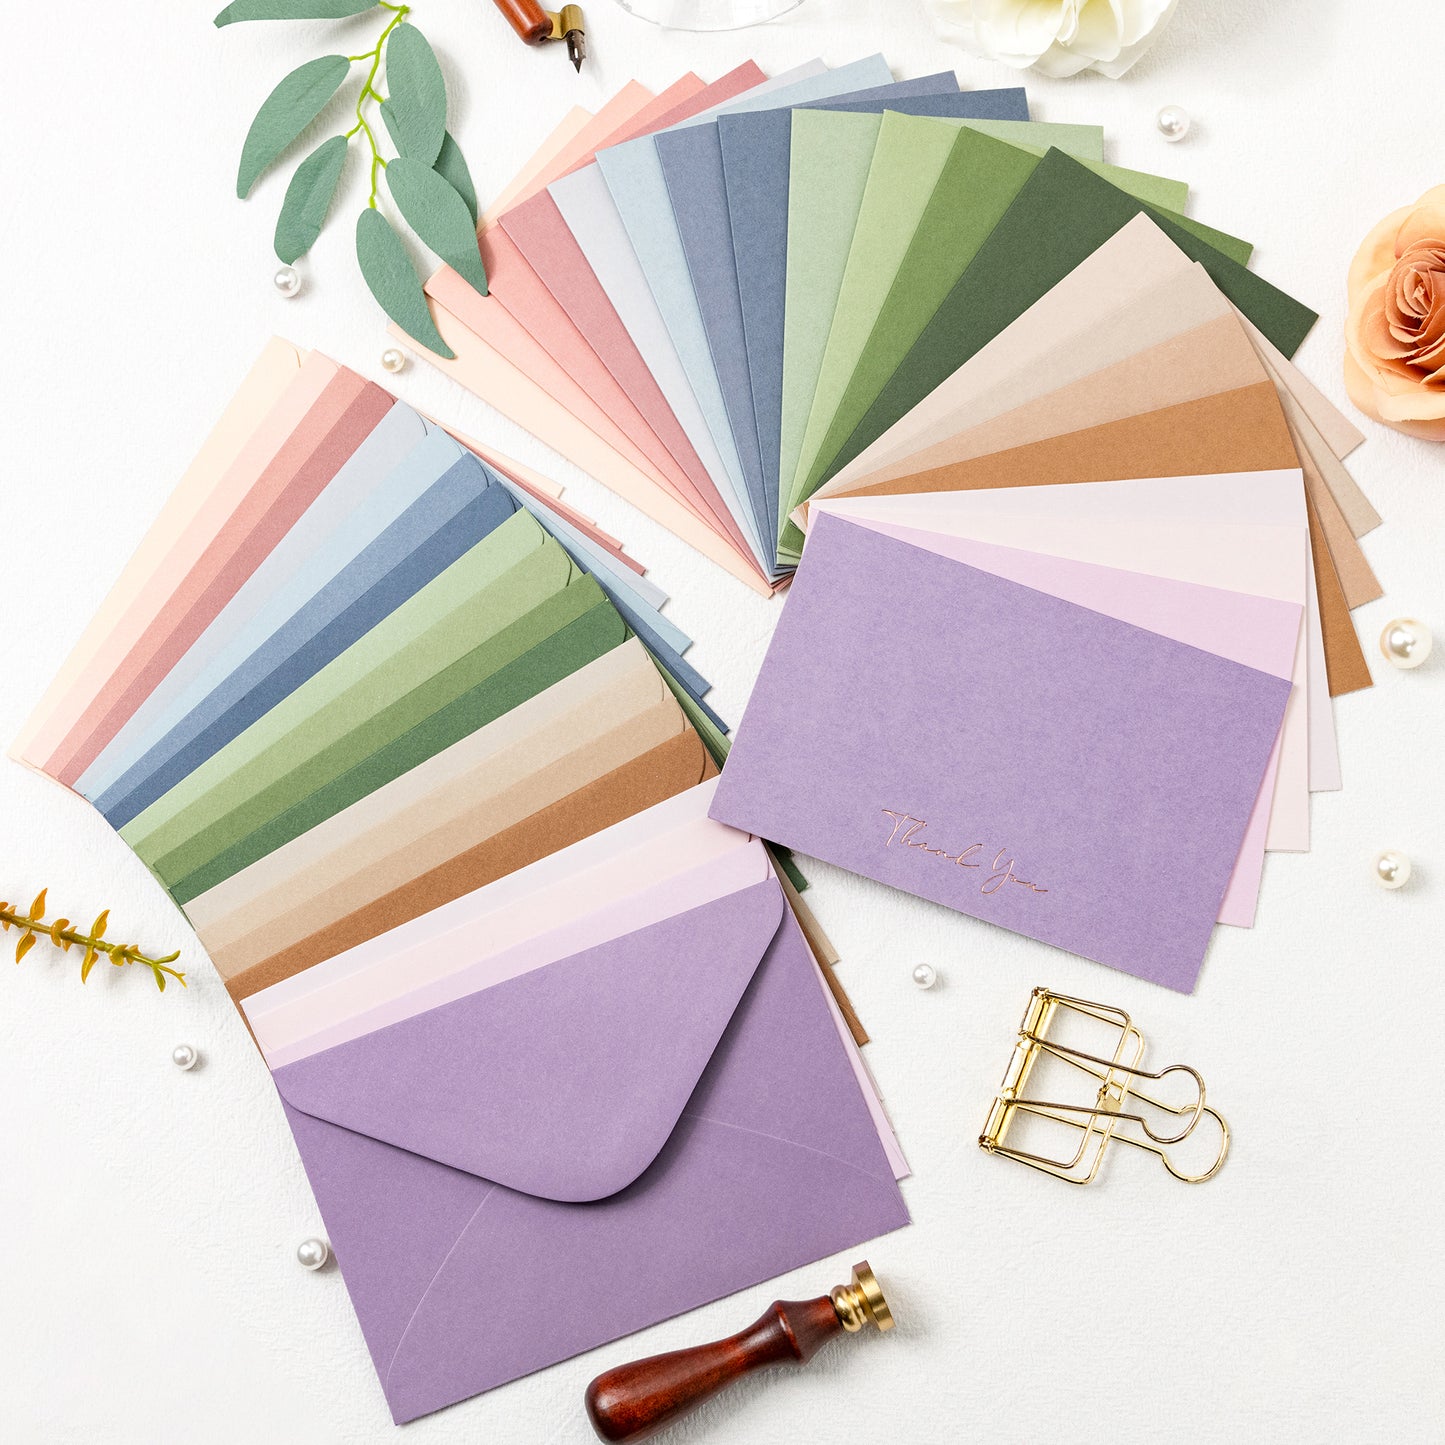 Crisky 100 Pack Thank You Greeting Cards With Envelope Mix Color Series Thank You Cards for Wedding/Bridal Shower/Baby Shower/Business/Graduation